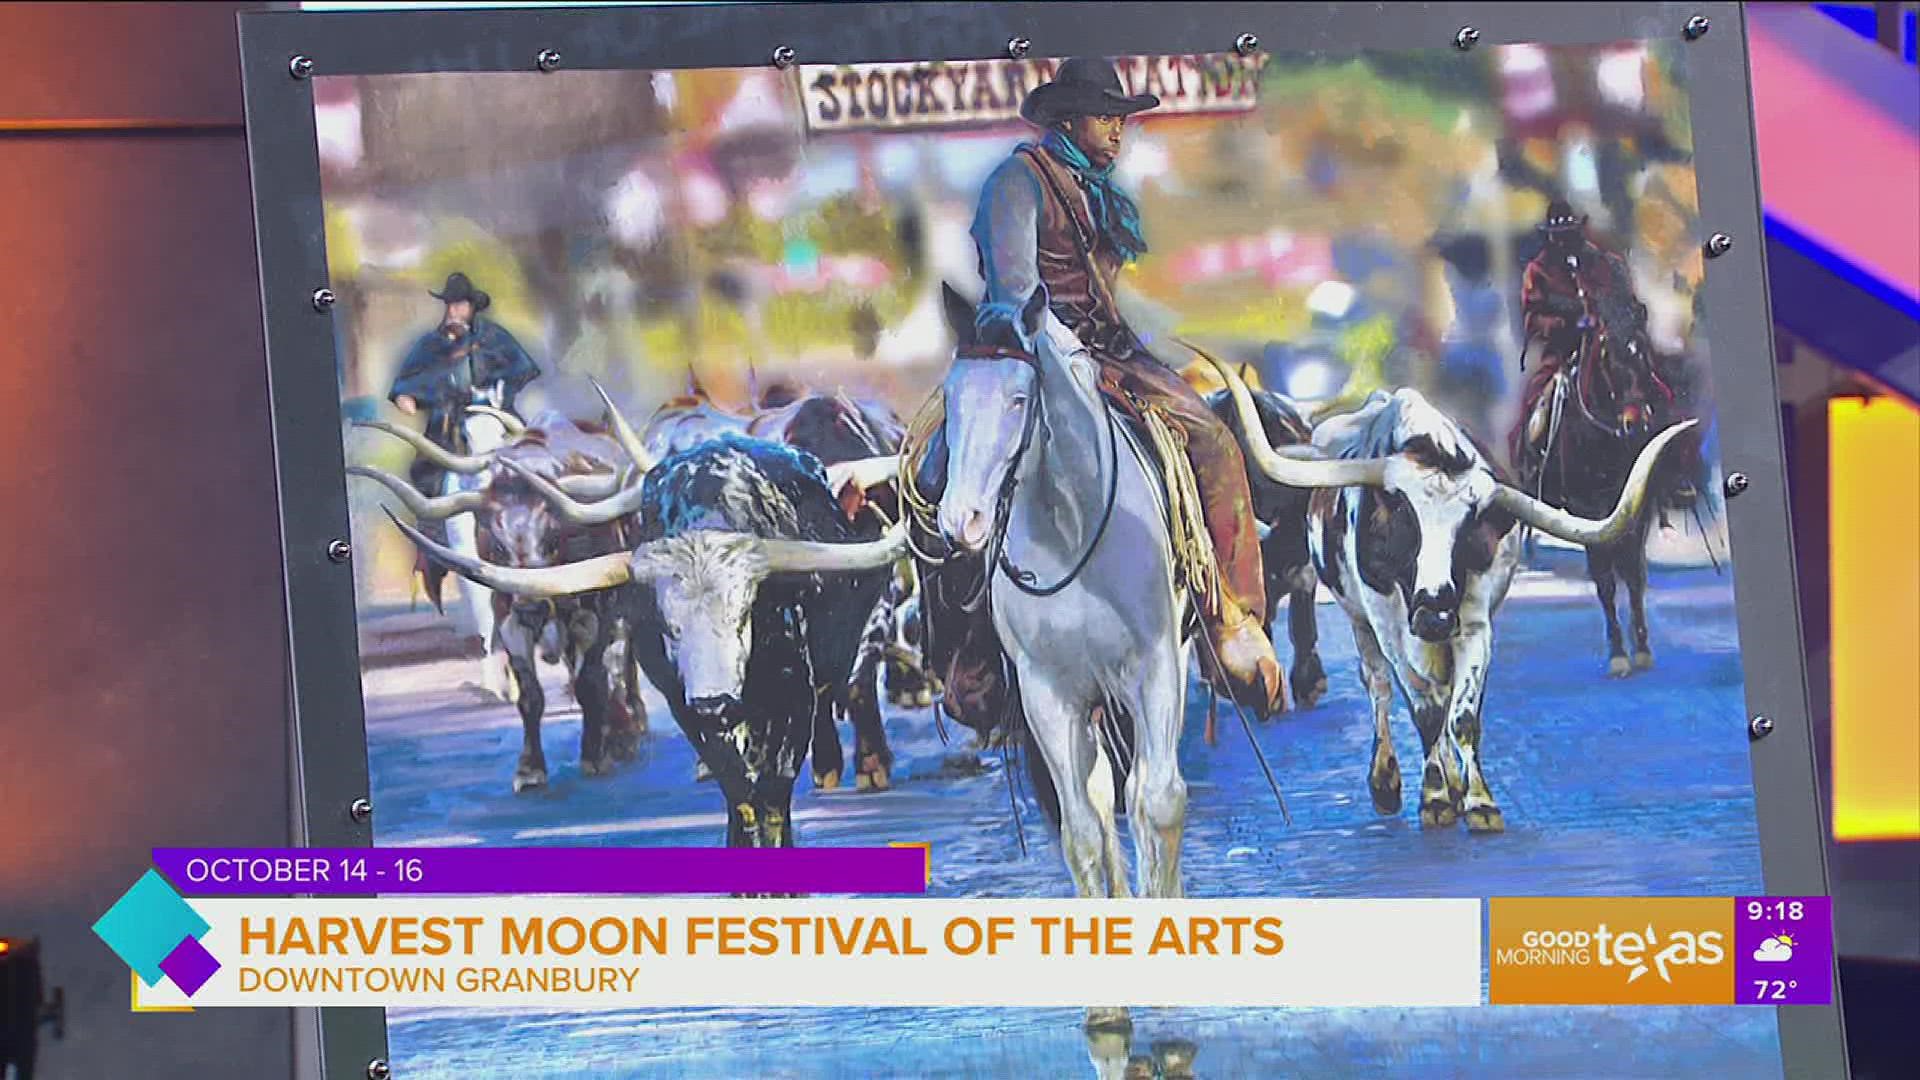 Harvest Moon Festival of the Arts in downtown Granbury